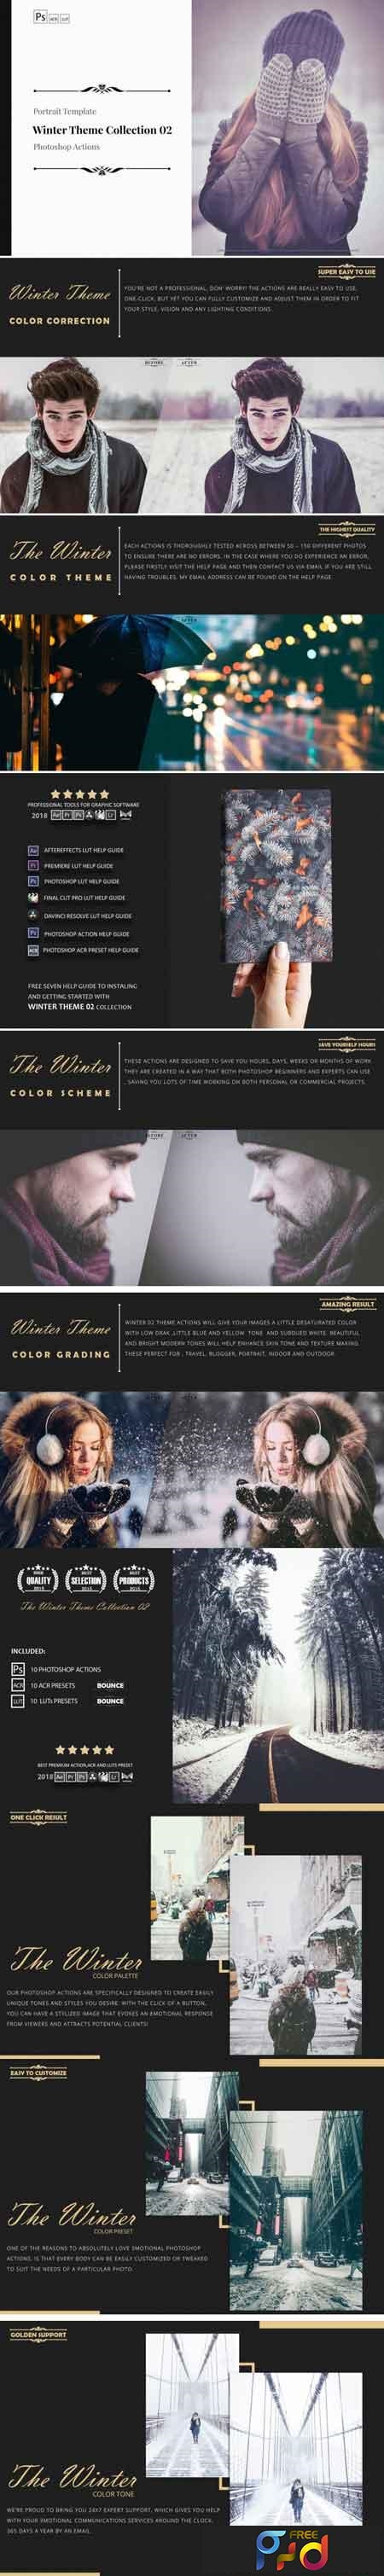 Winter Theme Color Grading Photoshop Actions Collection 02 3513223 1